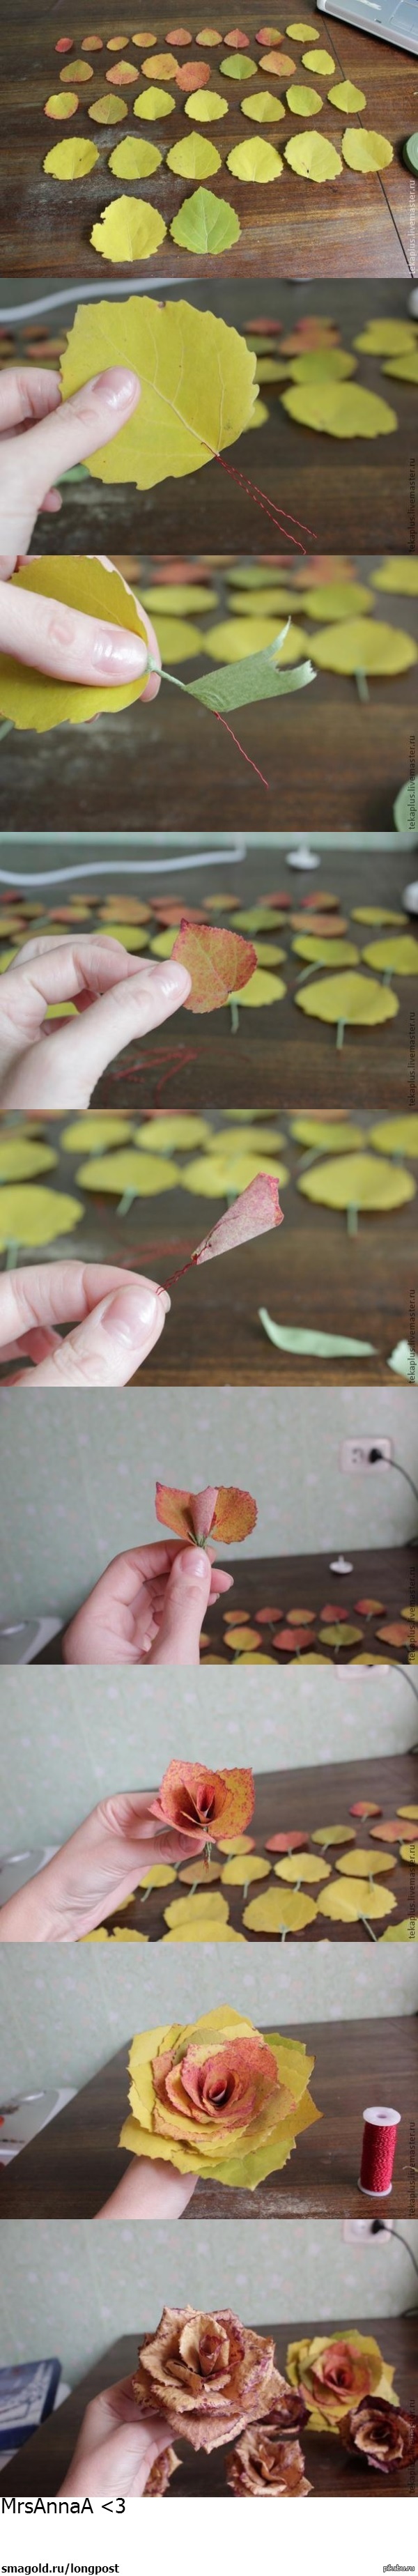 How to make a rose from leaves - the Rose, Leaves, Crafts, Longpost